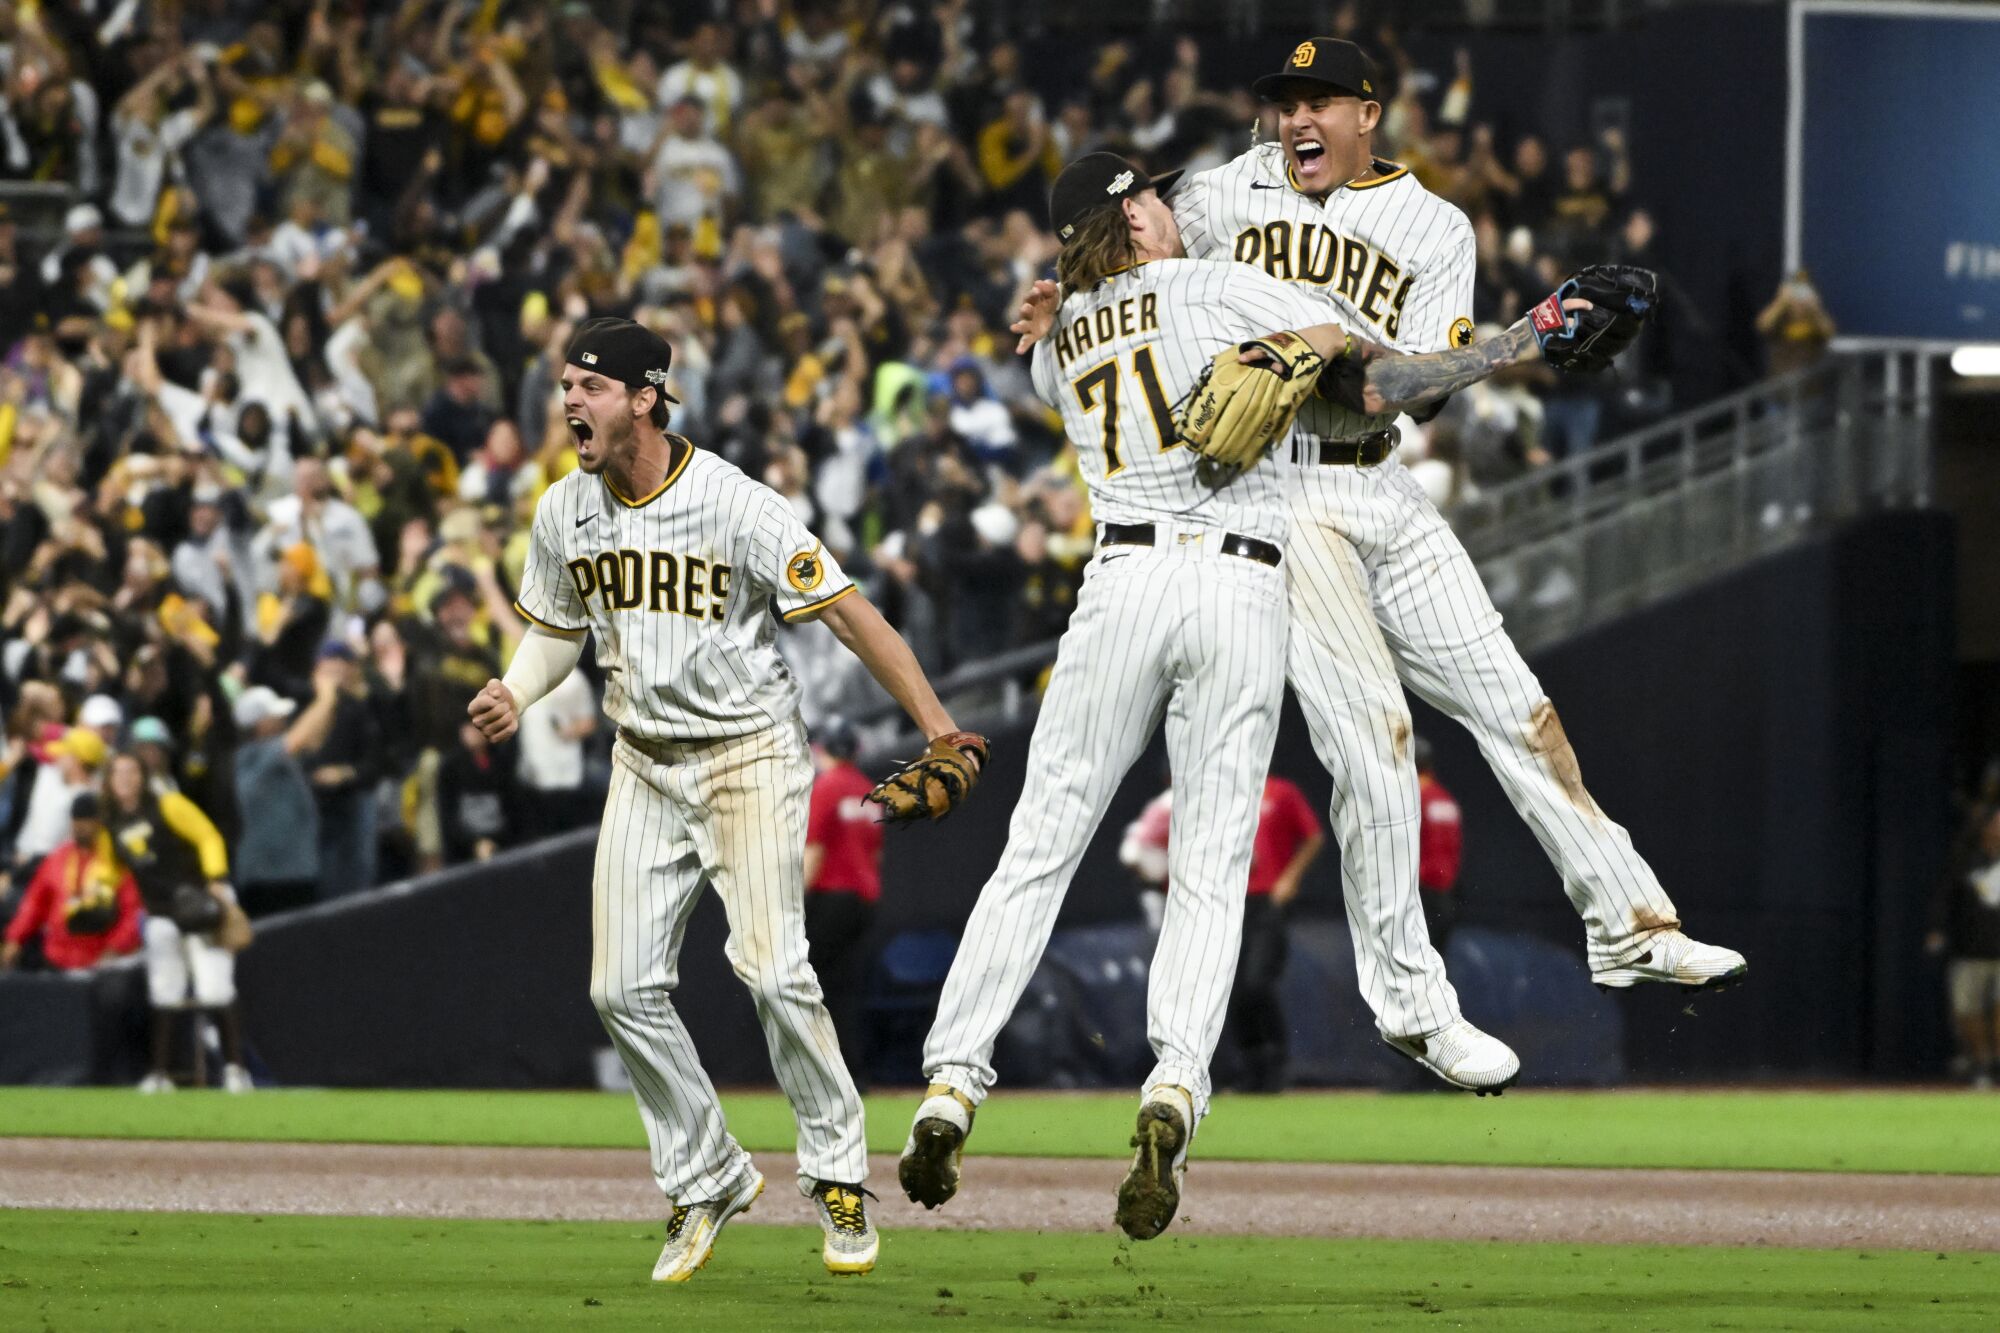  Padres celebrate after defeating the Los Angeles Dodgers 5-3 in game 4.